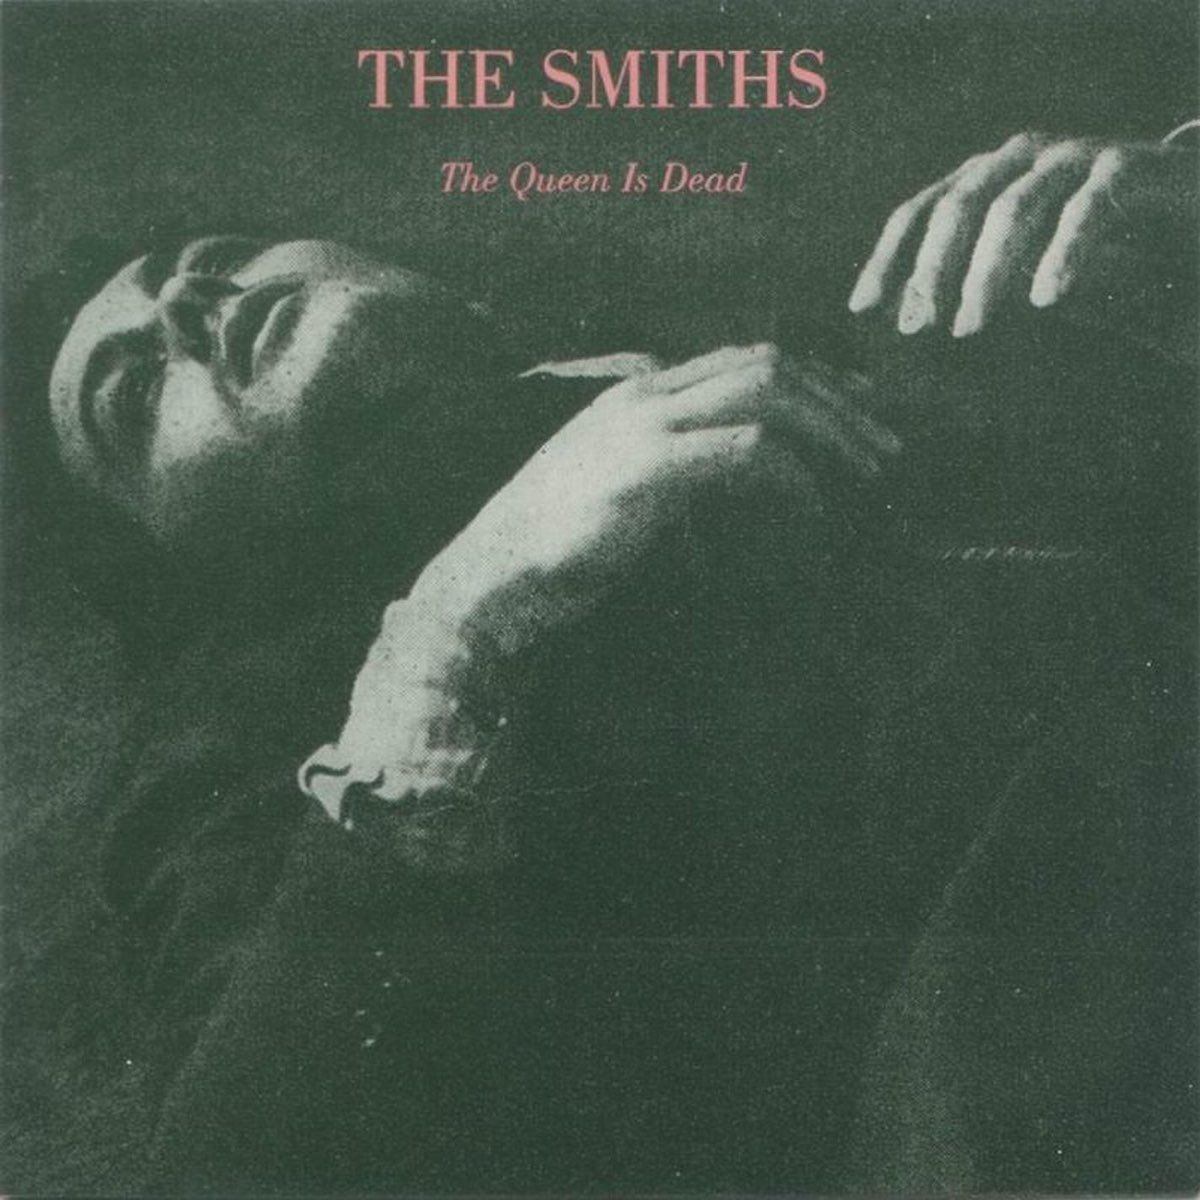 The Smiths The Queen is Dead cover artwork